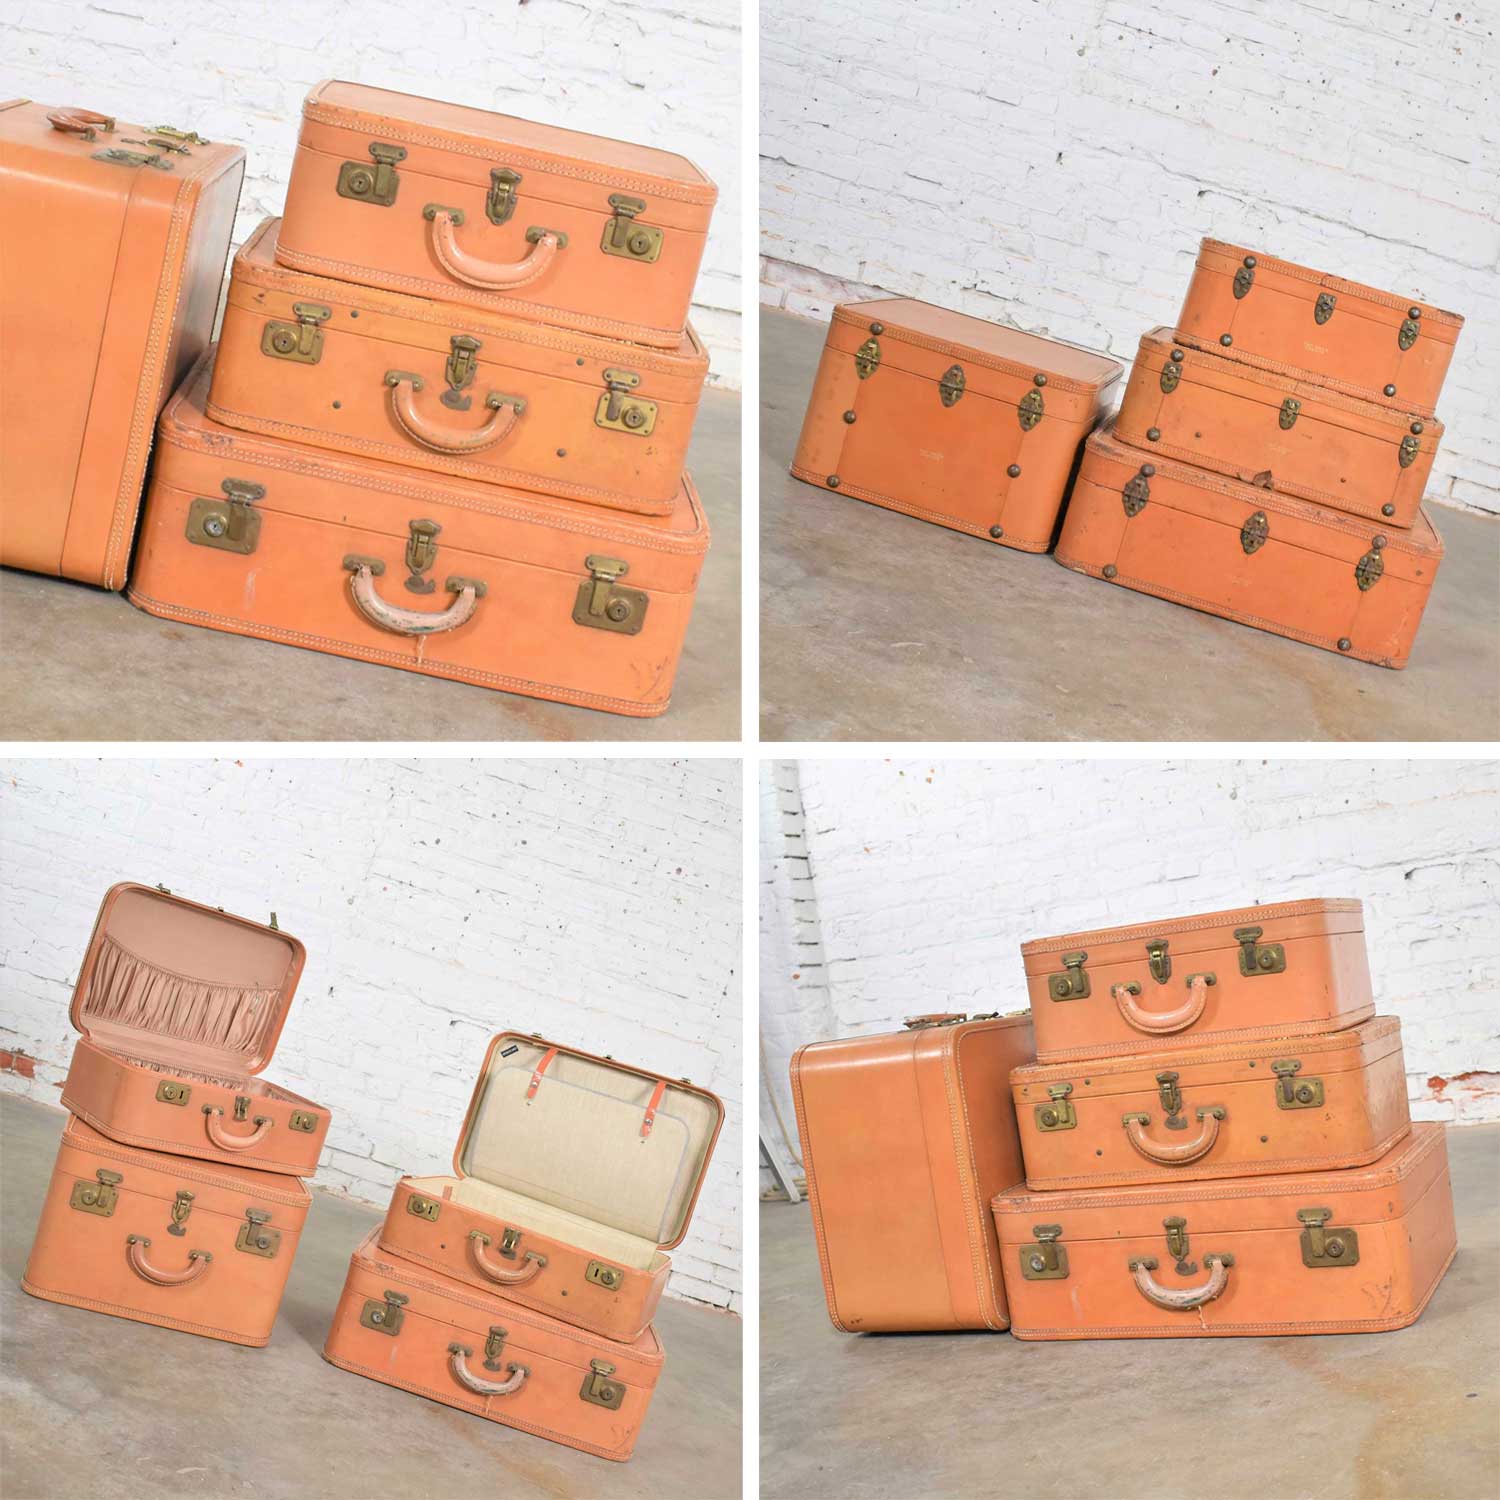 4 Vintage Stratosphere Rappaport Leather Suitcases Luggage as Side Tables End Tables